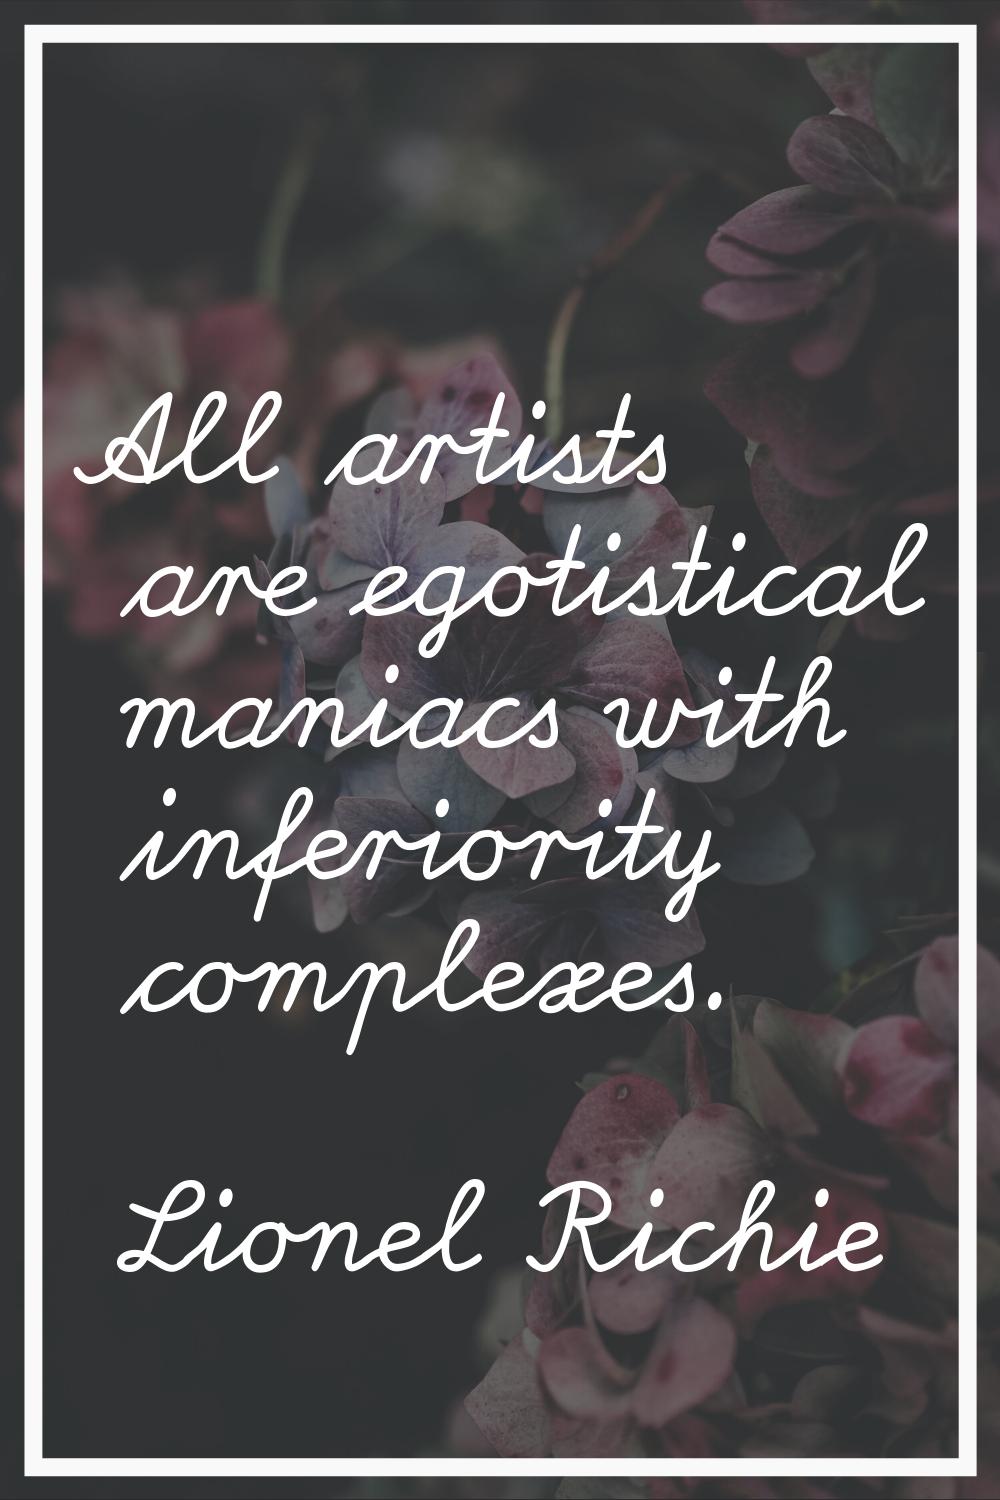 All artists are egotistical maniacs with inferiority complexes.